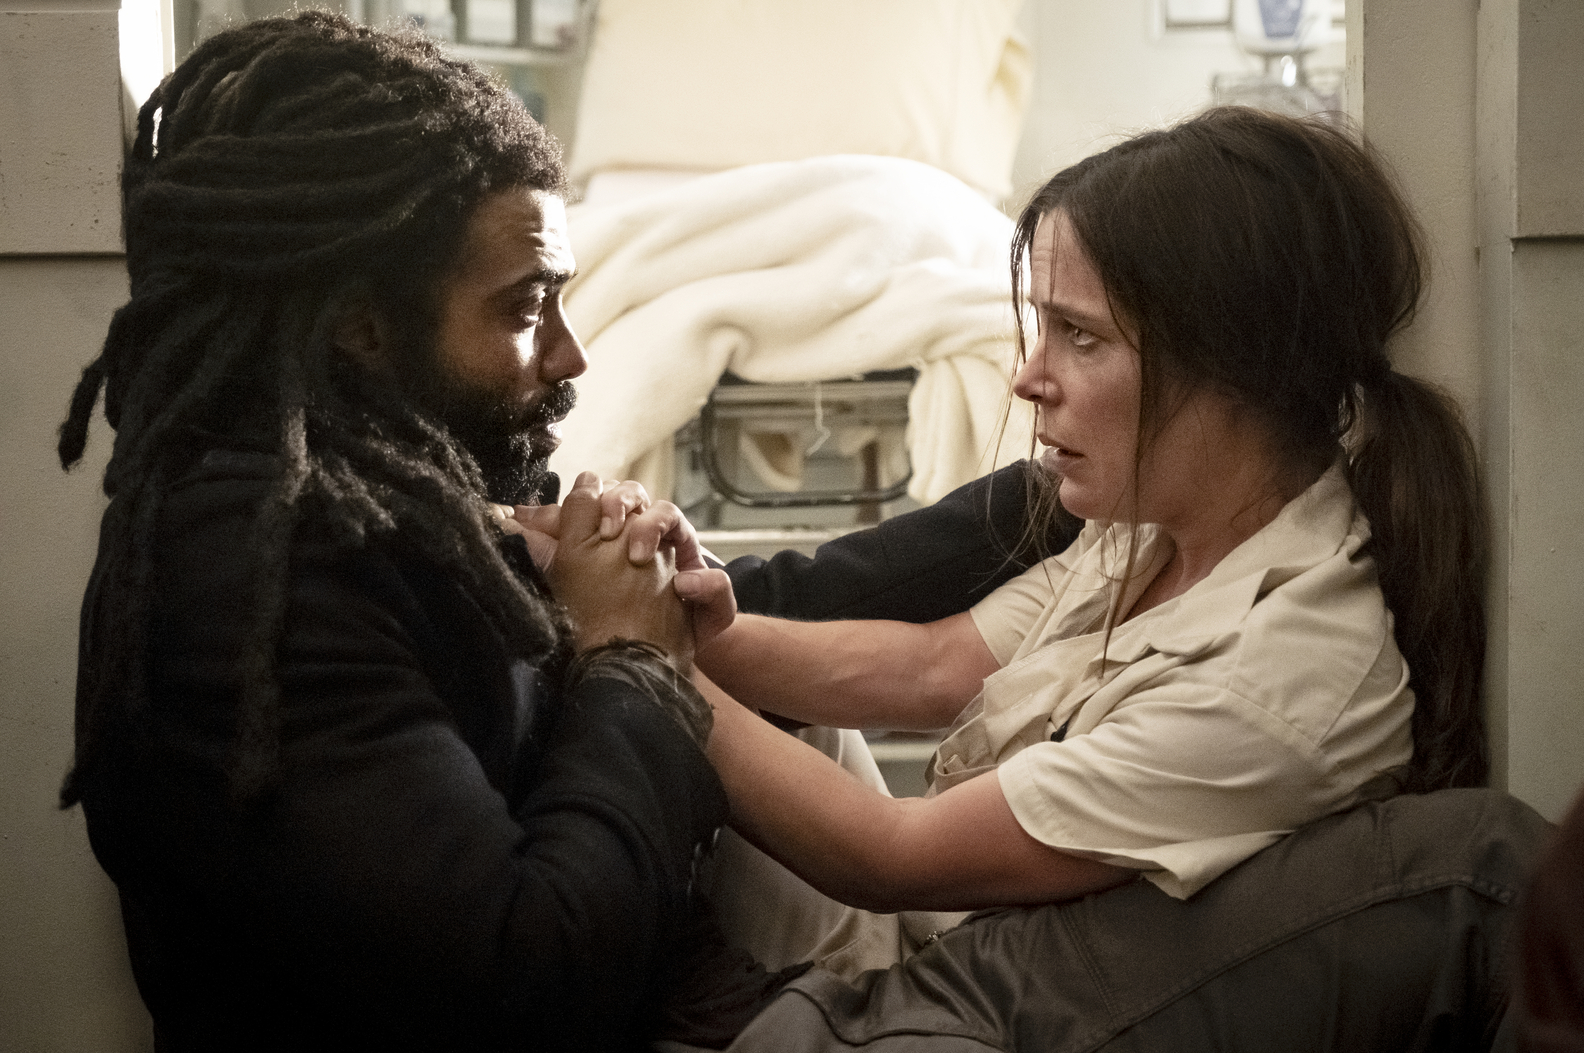 Katie McGuinness and Daveed Diggs in Snowpiercer (2017)